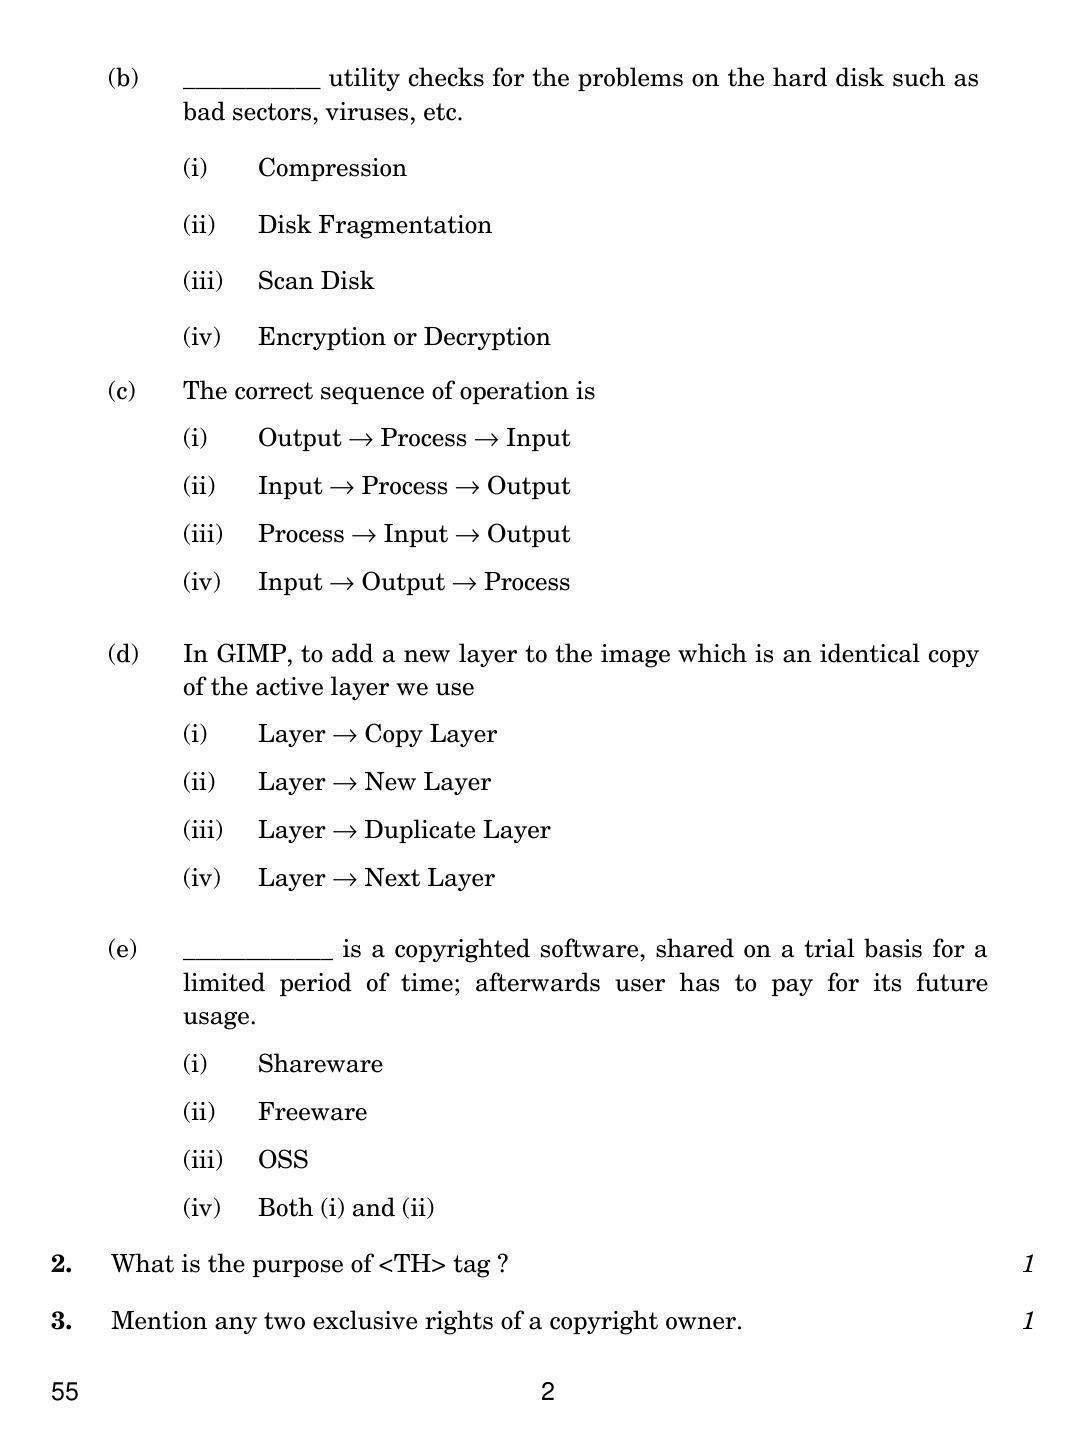 CBSE Class 10 55 INFORMATION AND COMMUNICATION TECHNOLOGY (ICT) 2019 Question Paper - Page 2